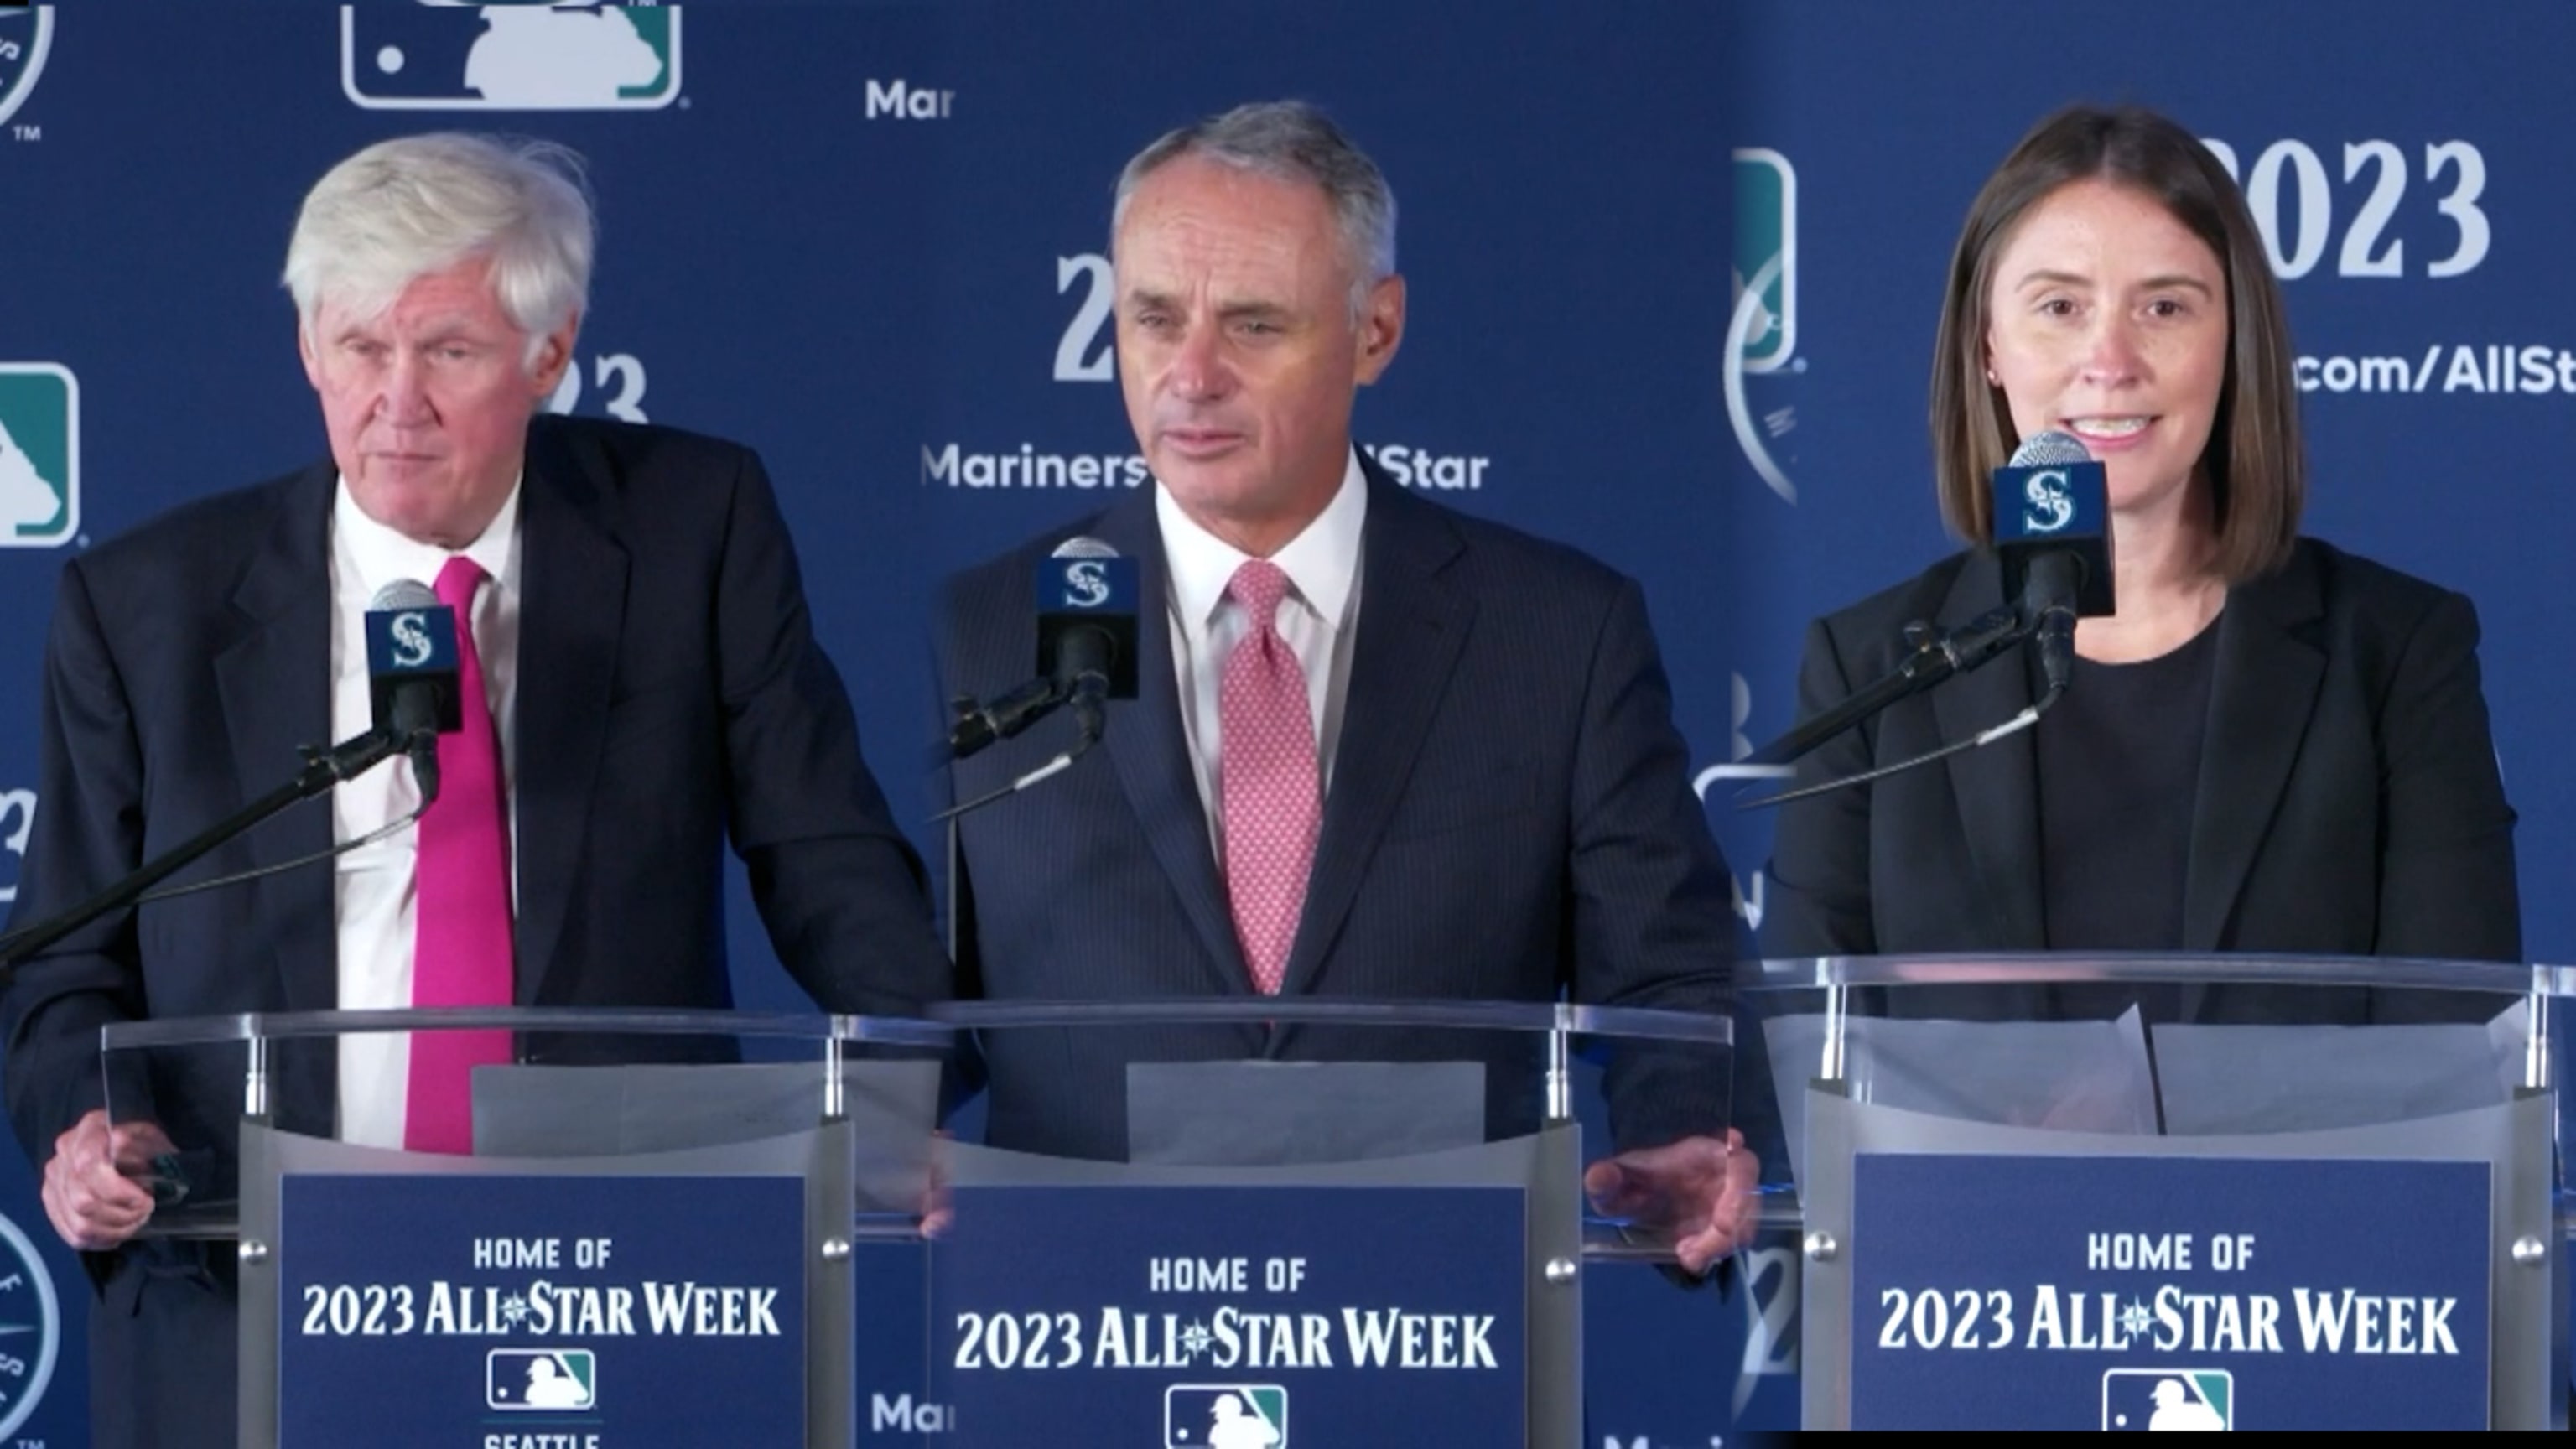 MLB and the Seattle Mariners Announce the 2023 All-Star Legacy